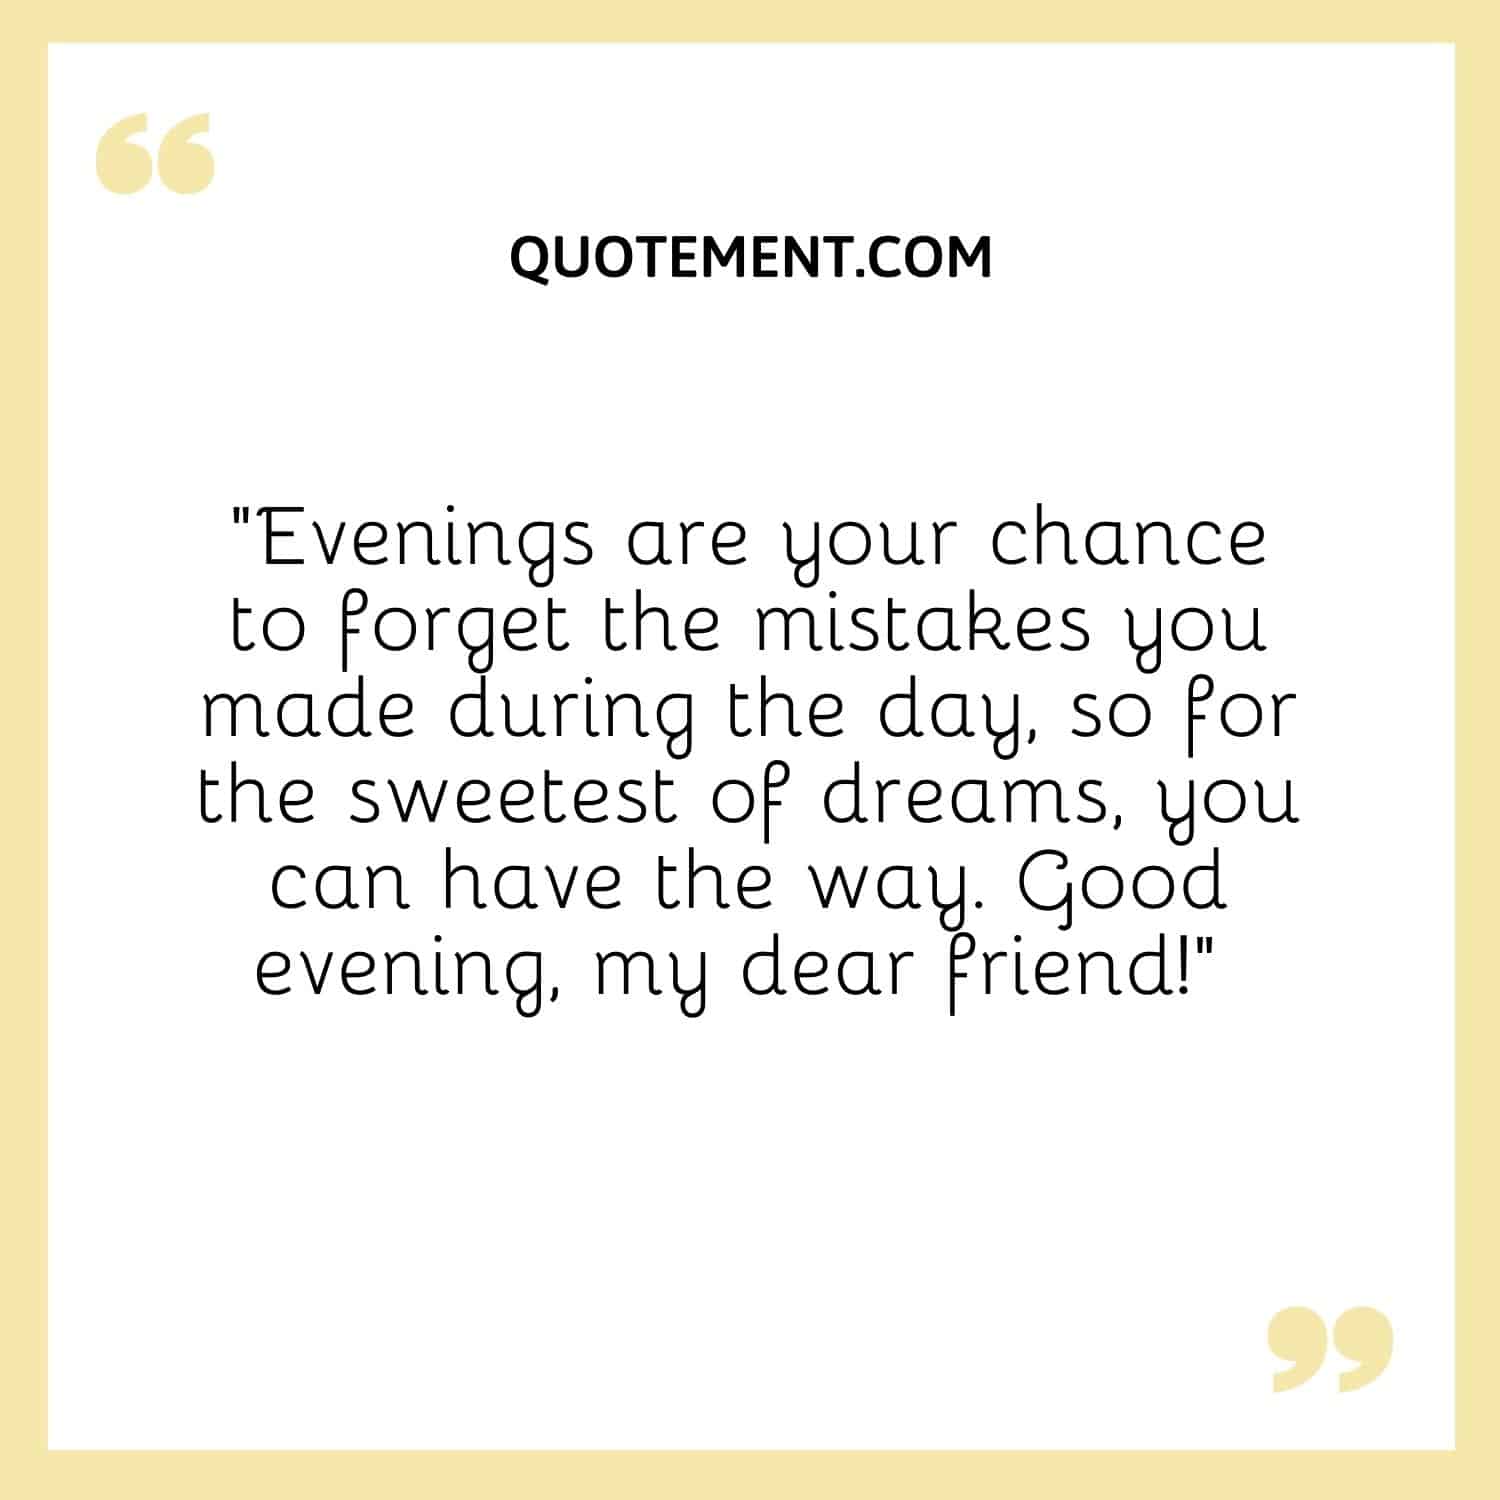 Evenings are your chance to forget the mistakes you made during the day,